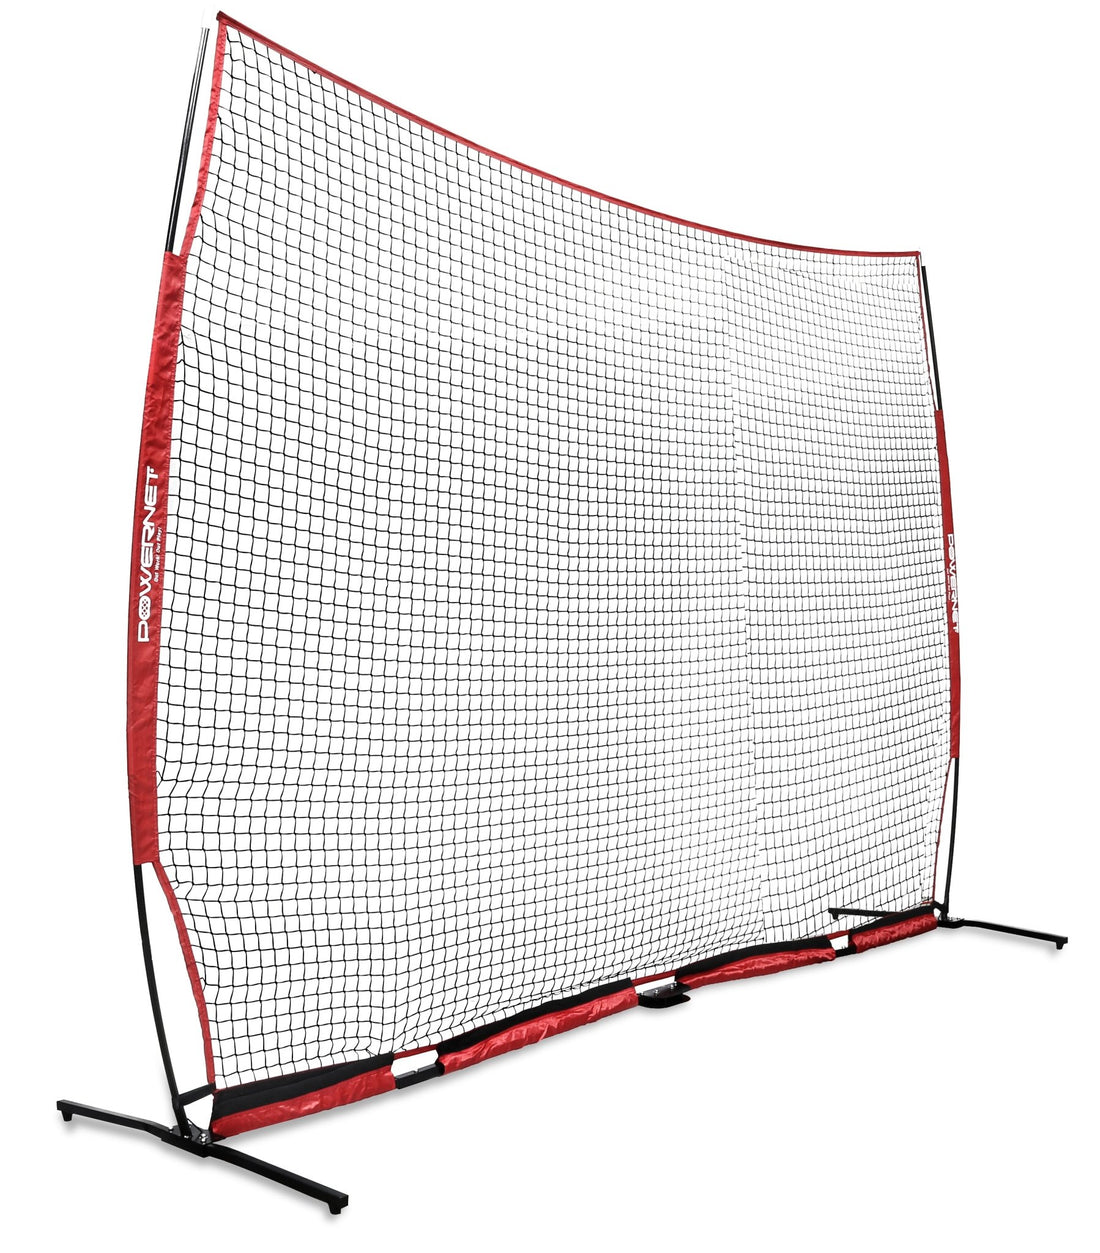 PowerNet XL Sports Barrier Net 21.5 ft x 11.5 ft - 247 SqFt of Protection - Maximum Velocity Sports